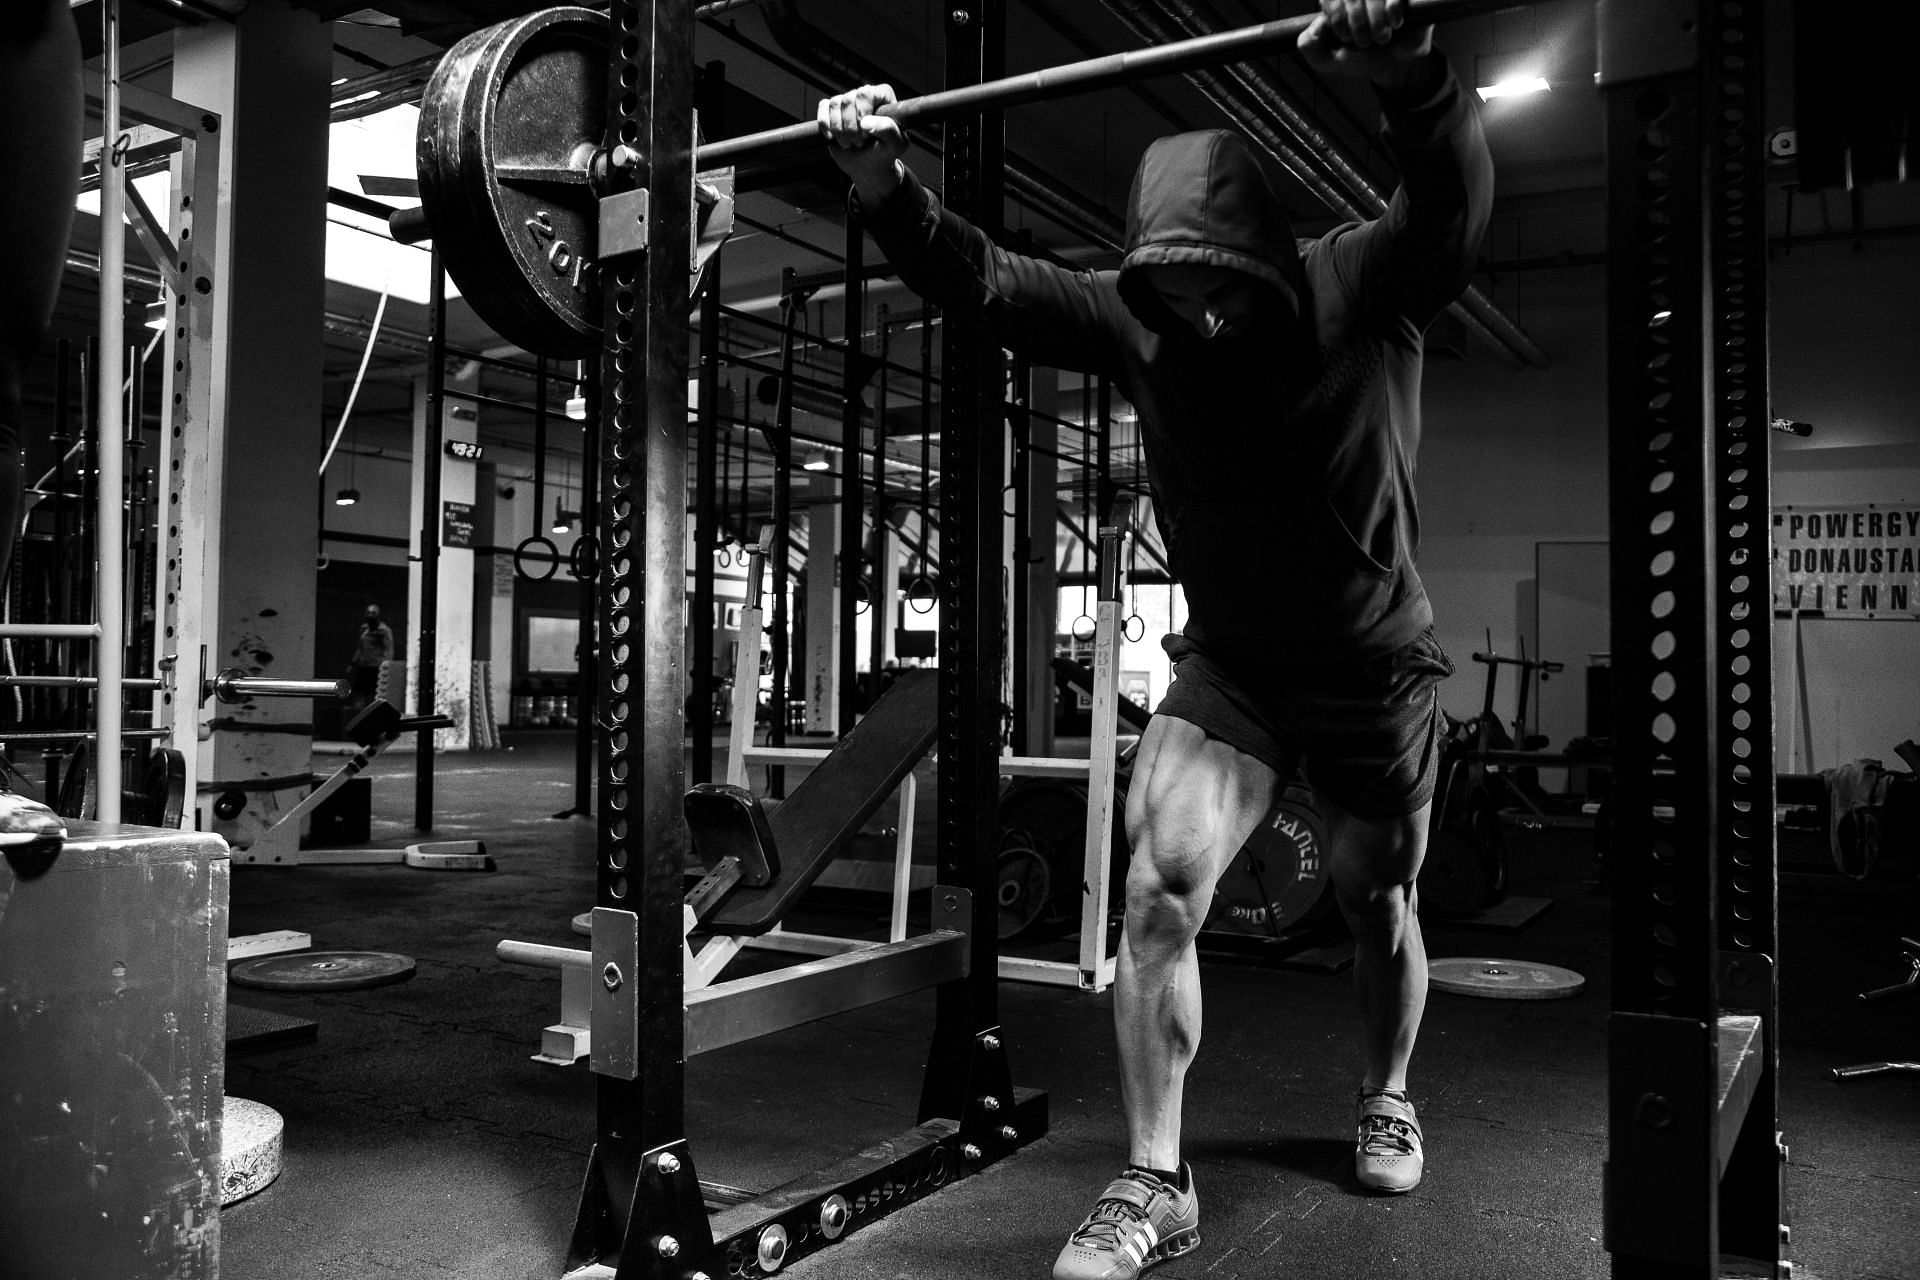 Sissy squats are a variation of the standard squat that targets quadriceps femoris, also known as the quads. (Image via Unsplash / Alexander Redl)